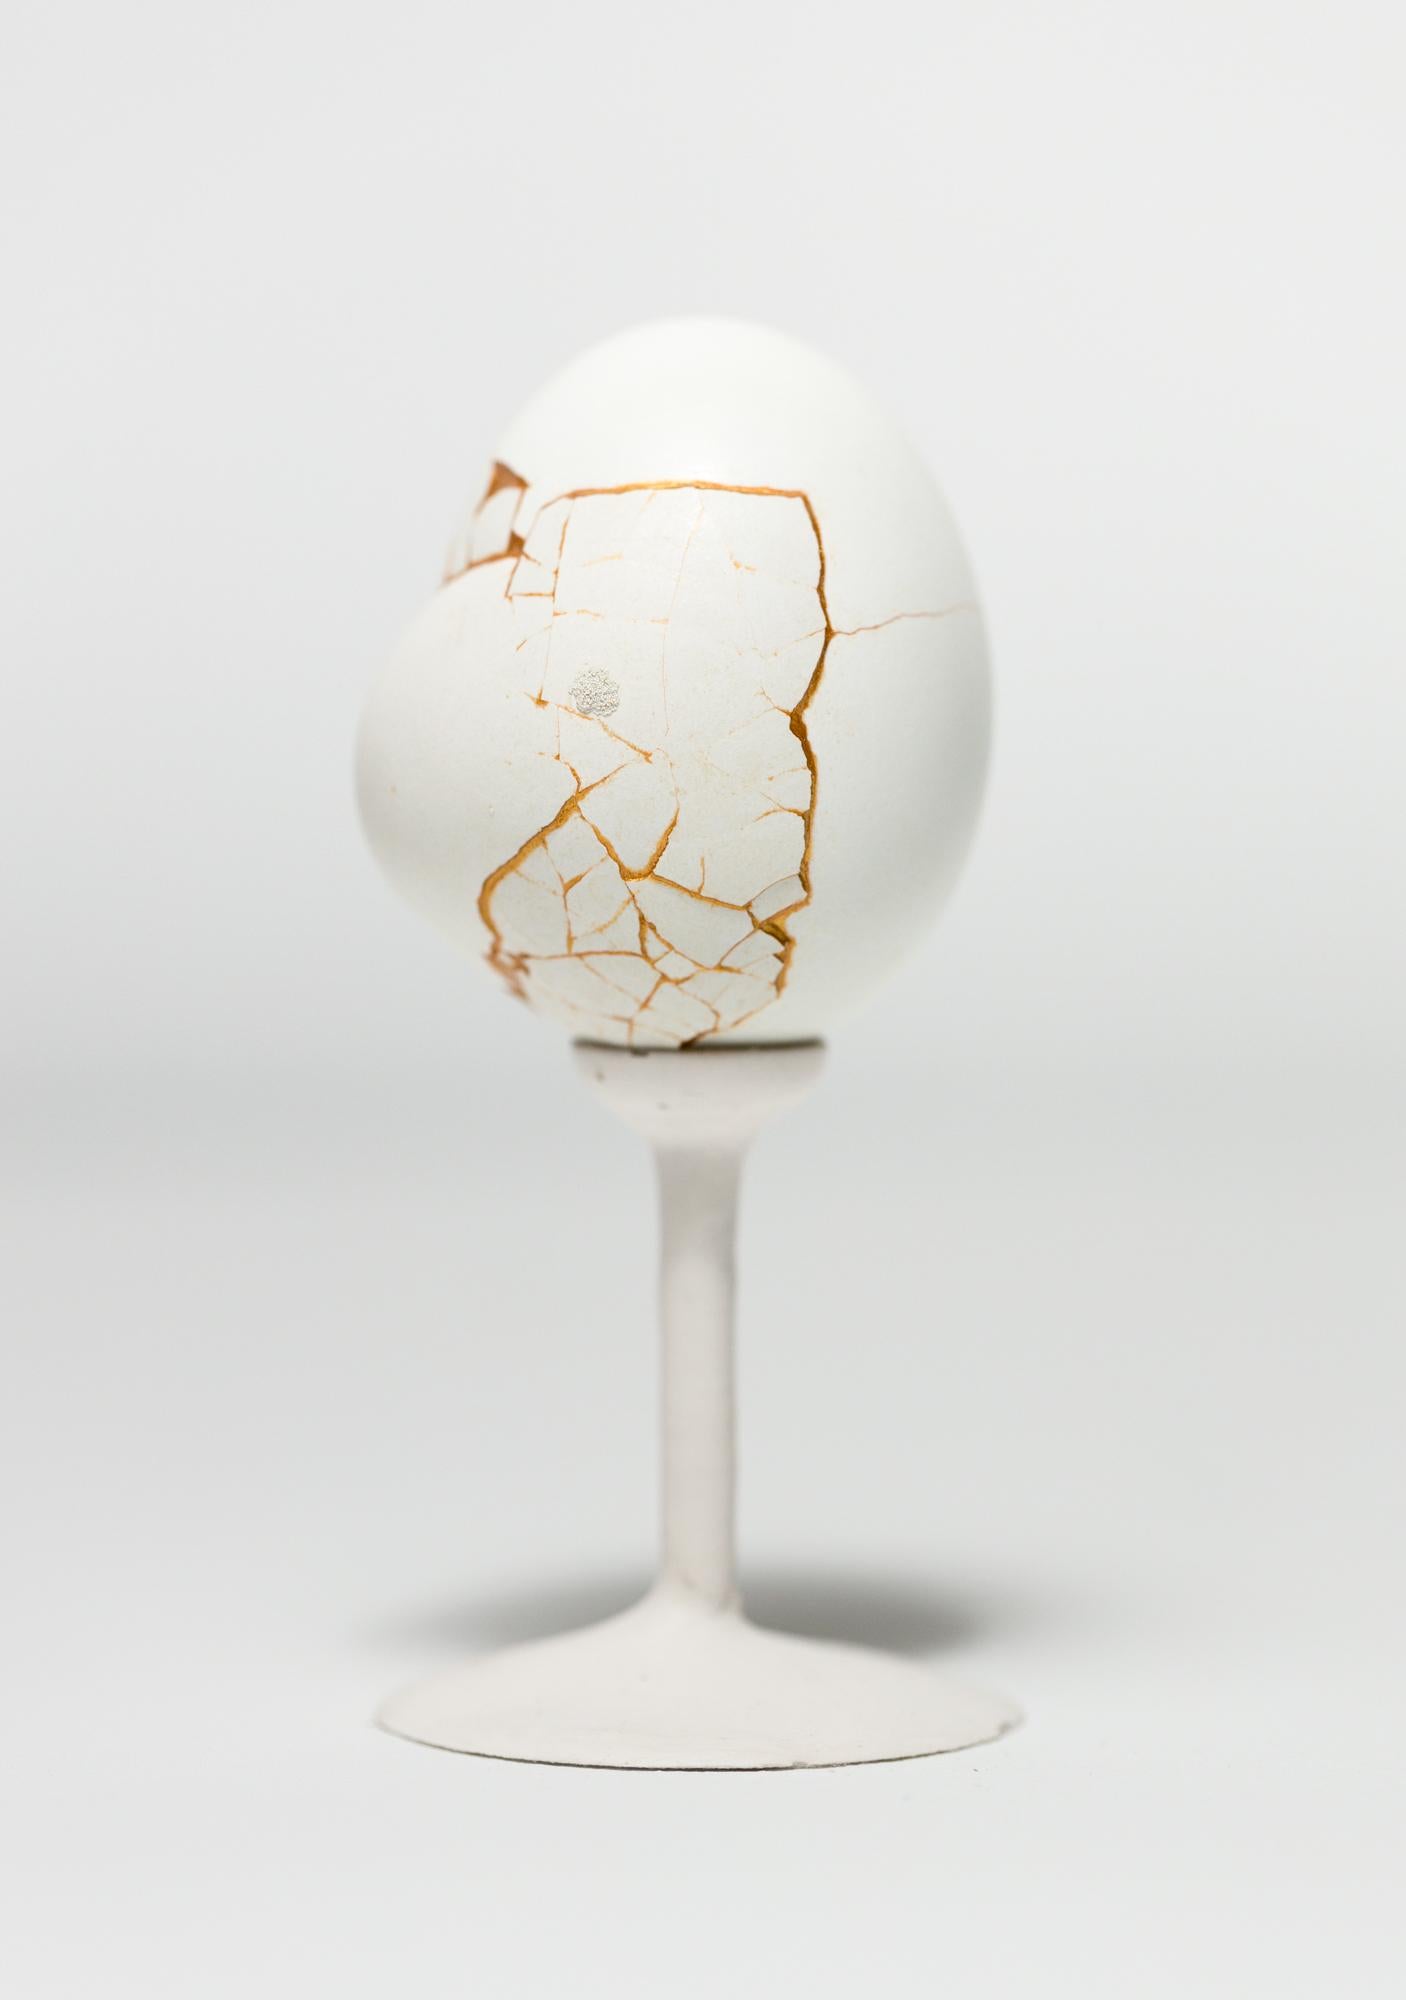 This piece titled "Chimaera: Green #9" is an original piece by Kate VanVliet and is made from eggshells, mica, and PVA. This piece measures 2.5”h x 2”w x 2”d and ships with the pictured display stand.

Kate VanVliet is a sculptor and printmaker